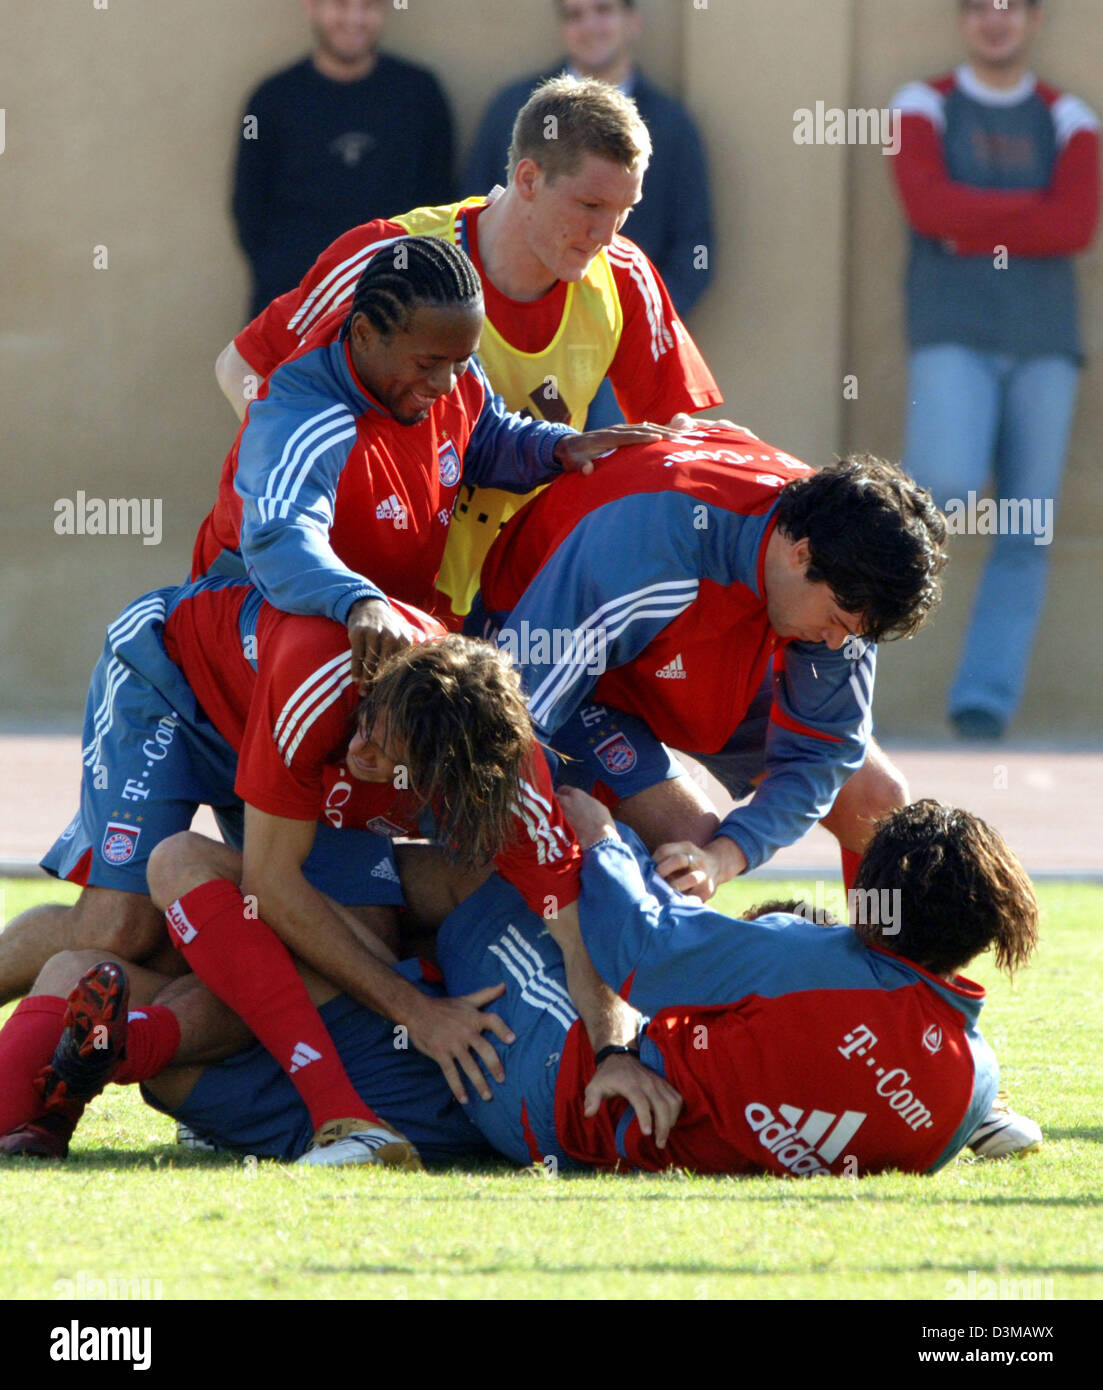 German Bundesliga club FC Bayern Munich's players Claudio Pizarro, Ze Roberto, Bastian Schweinsteiger, Michael Ballack und Jose Paolo Guerrero (L-R) fight for the ball during a handball practice match on the premises of the Al Wasl soccer club in Dubai, United Arab Emirate, Wednesday 11 January 2006. In the back Bixente Lizarazu (L) and Claudio Pizarro are looking on. The team stay Stock Photo